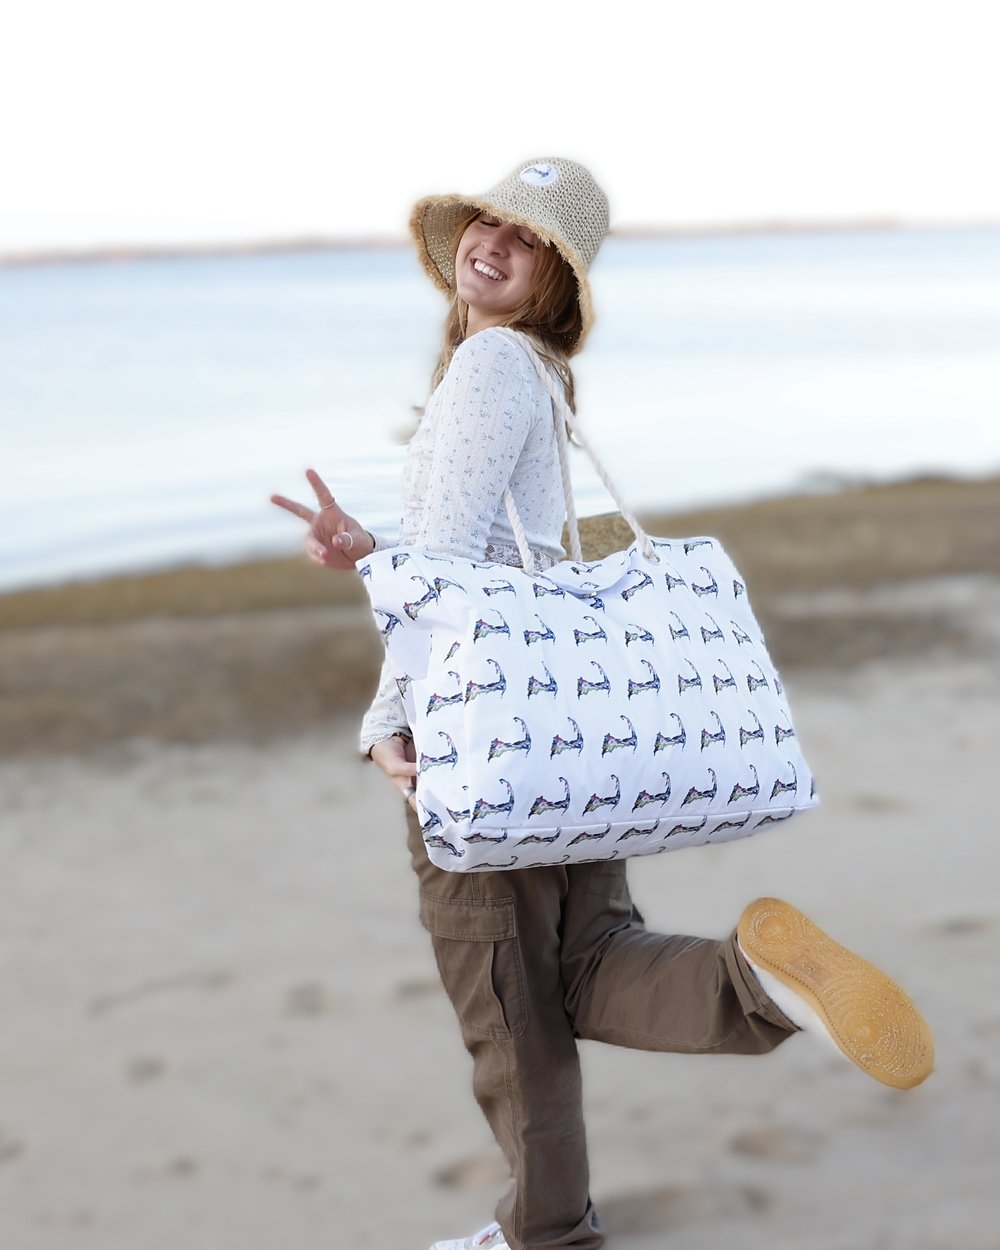 Cape Cod Bag, Cape Cod Tote Bag, Cape Cod Bags, Cape Cod Gifts